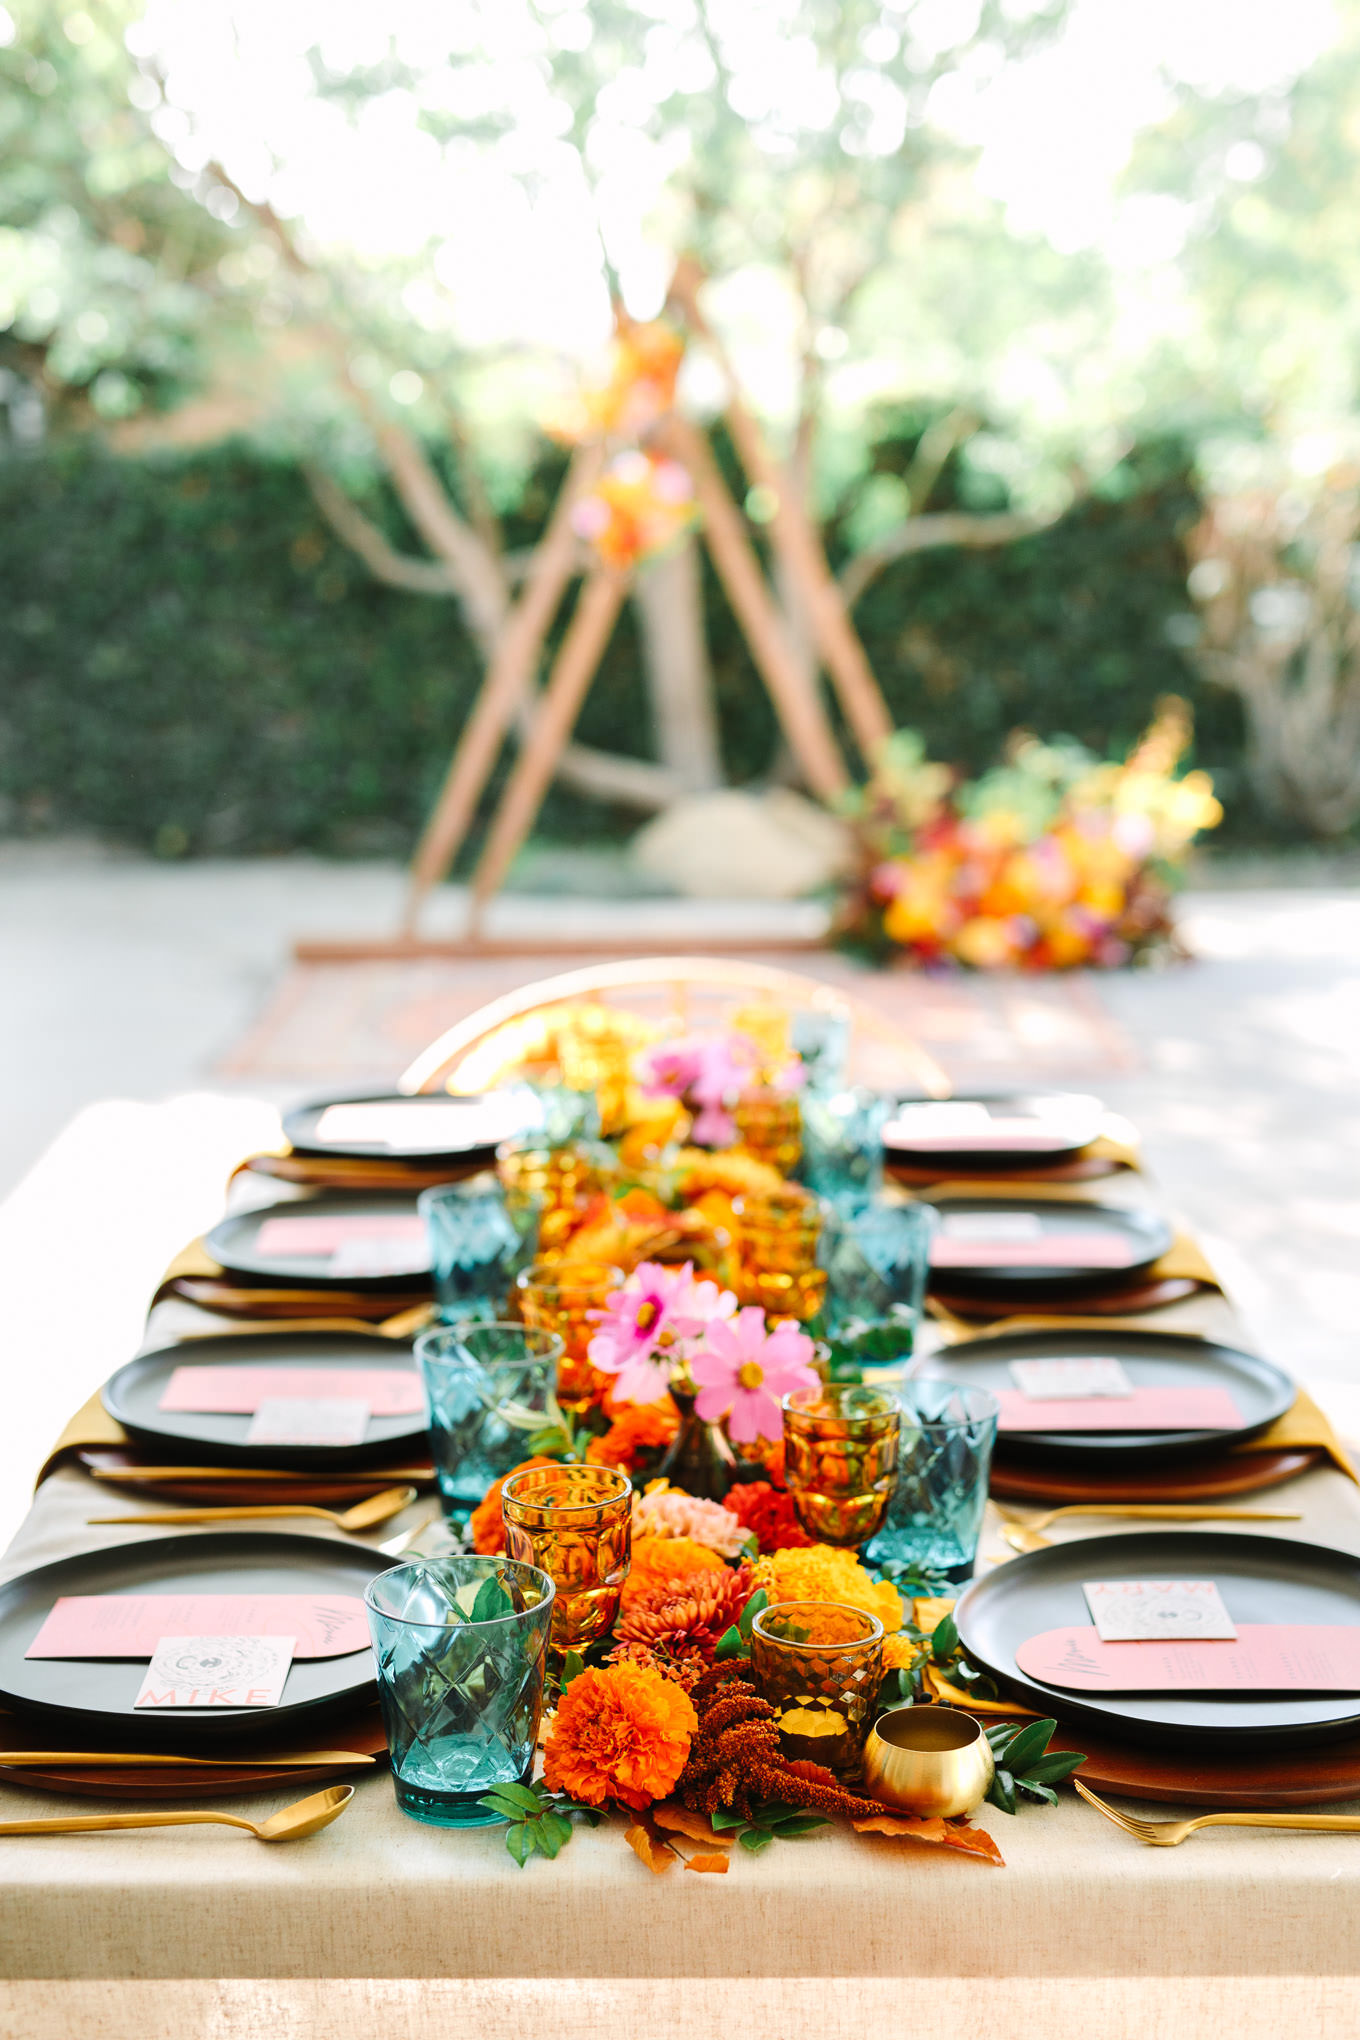 Intimate wedding tablescape | Vibrant backyard micro wedding featured on Green Wedding Shoes | Colorful LA wedding photography | #losangeleswedding #backyardwedding #microwedding #laweddingphotographer Source: Mary Costa Photography | Los Angeles